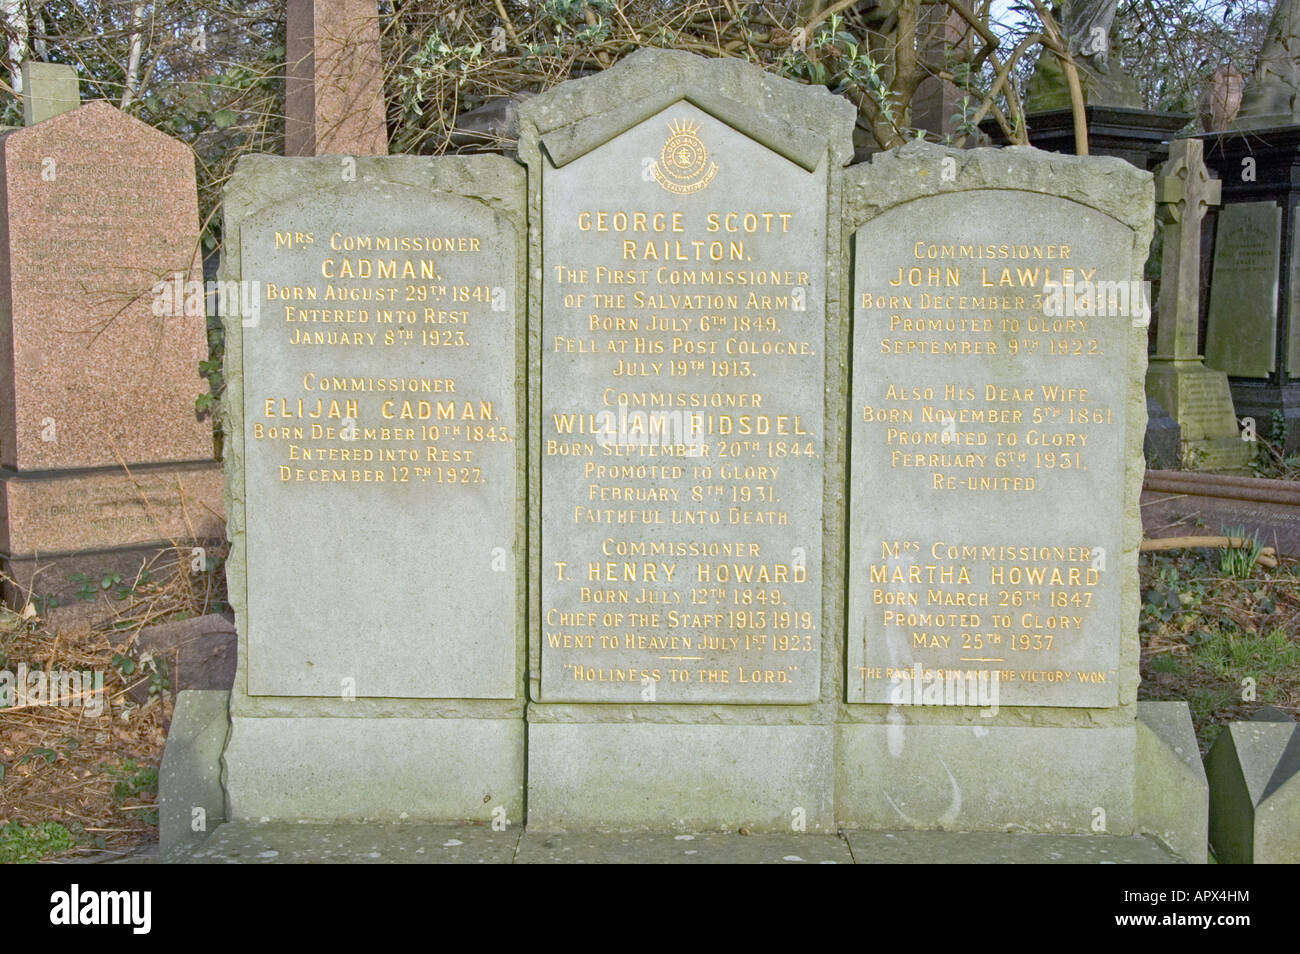 Gravestones of the early Commissioners of The Salvation Army Abney Park Cemetery Stoke Newington London England UK Stock Photo